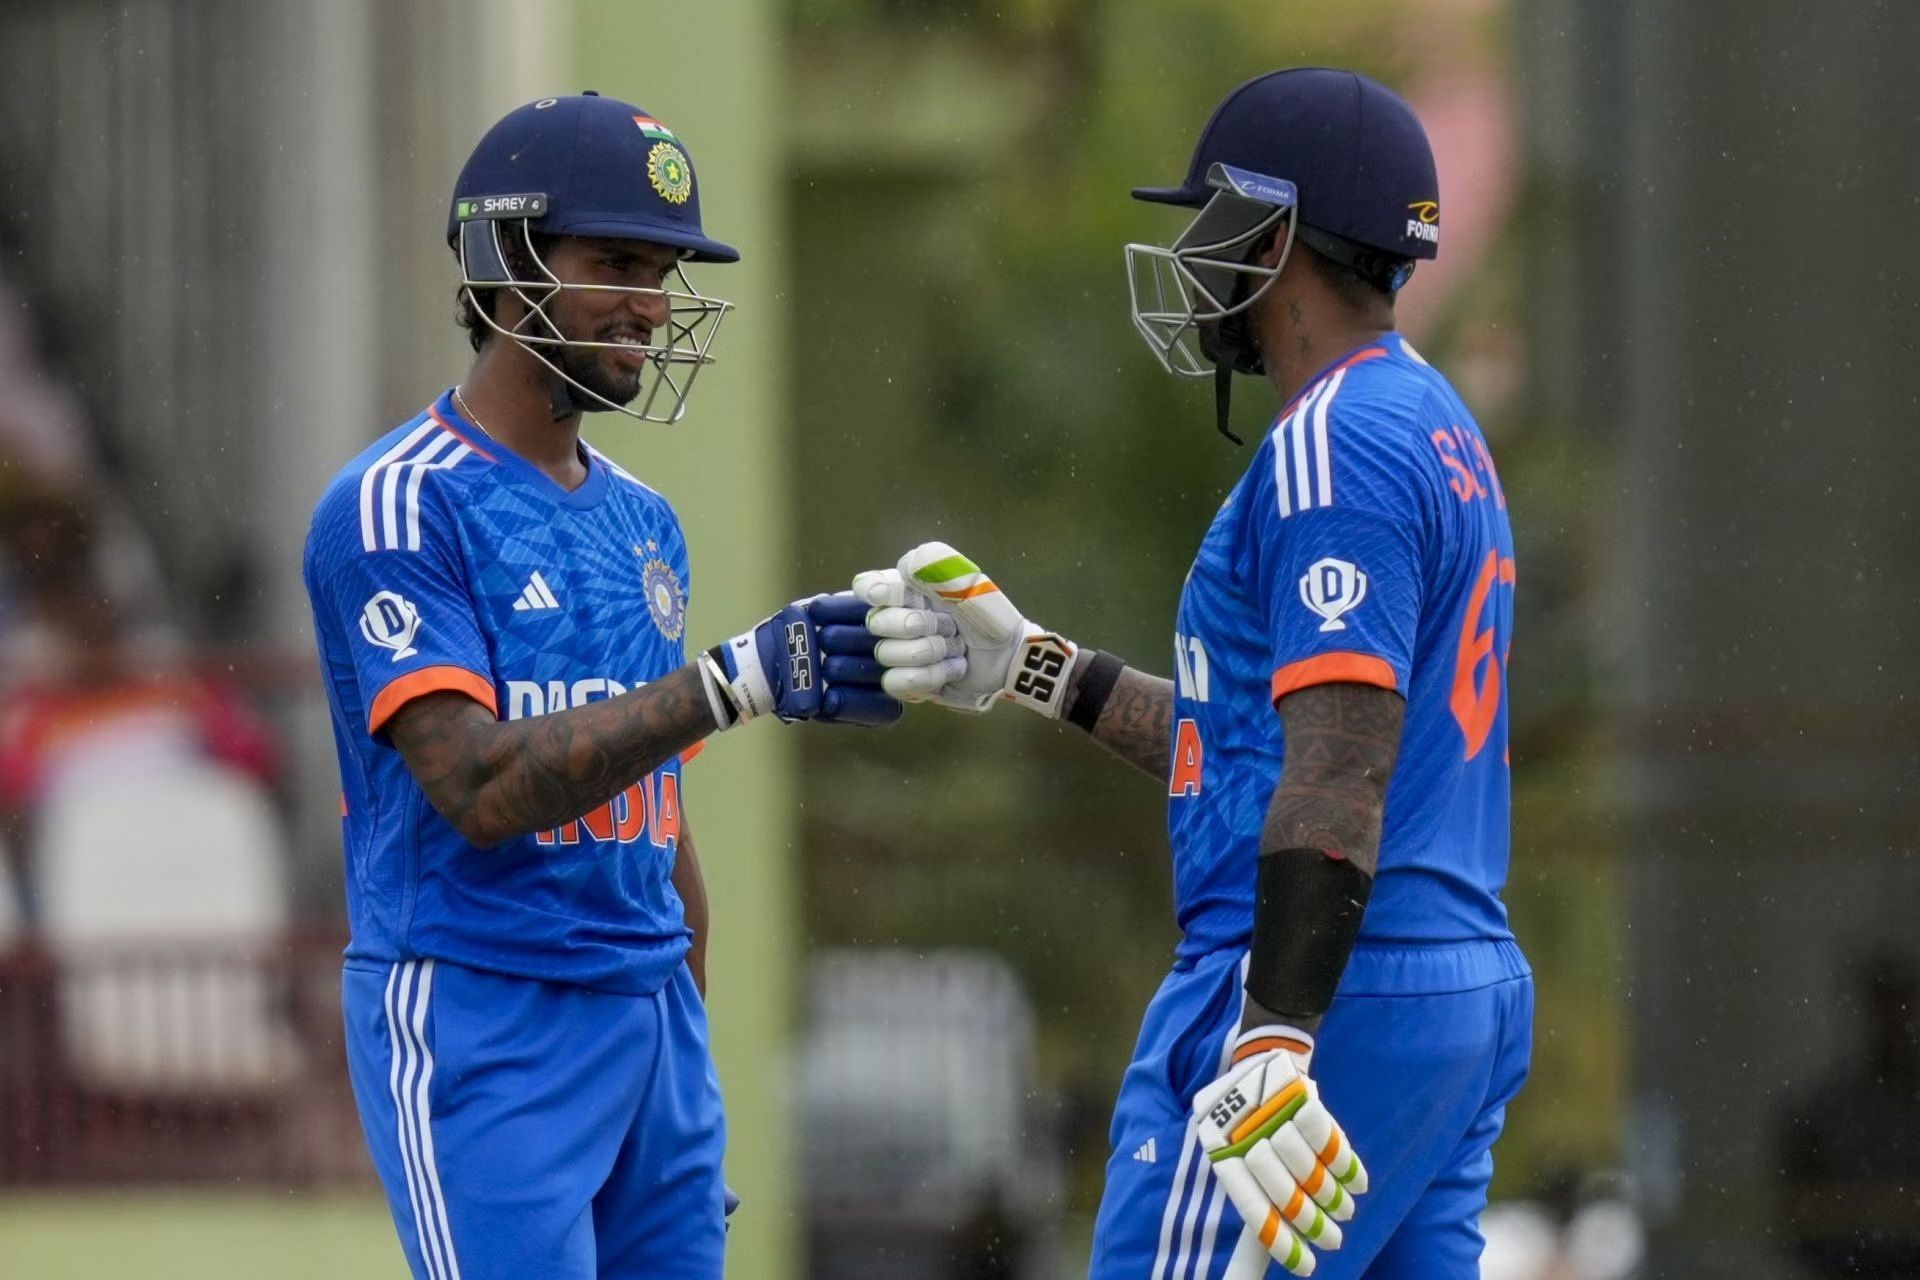 Tilak Varma and Suryakumar Yadav will likely compete for a middle-order berth.